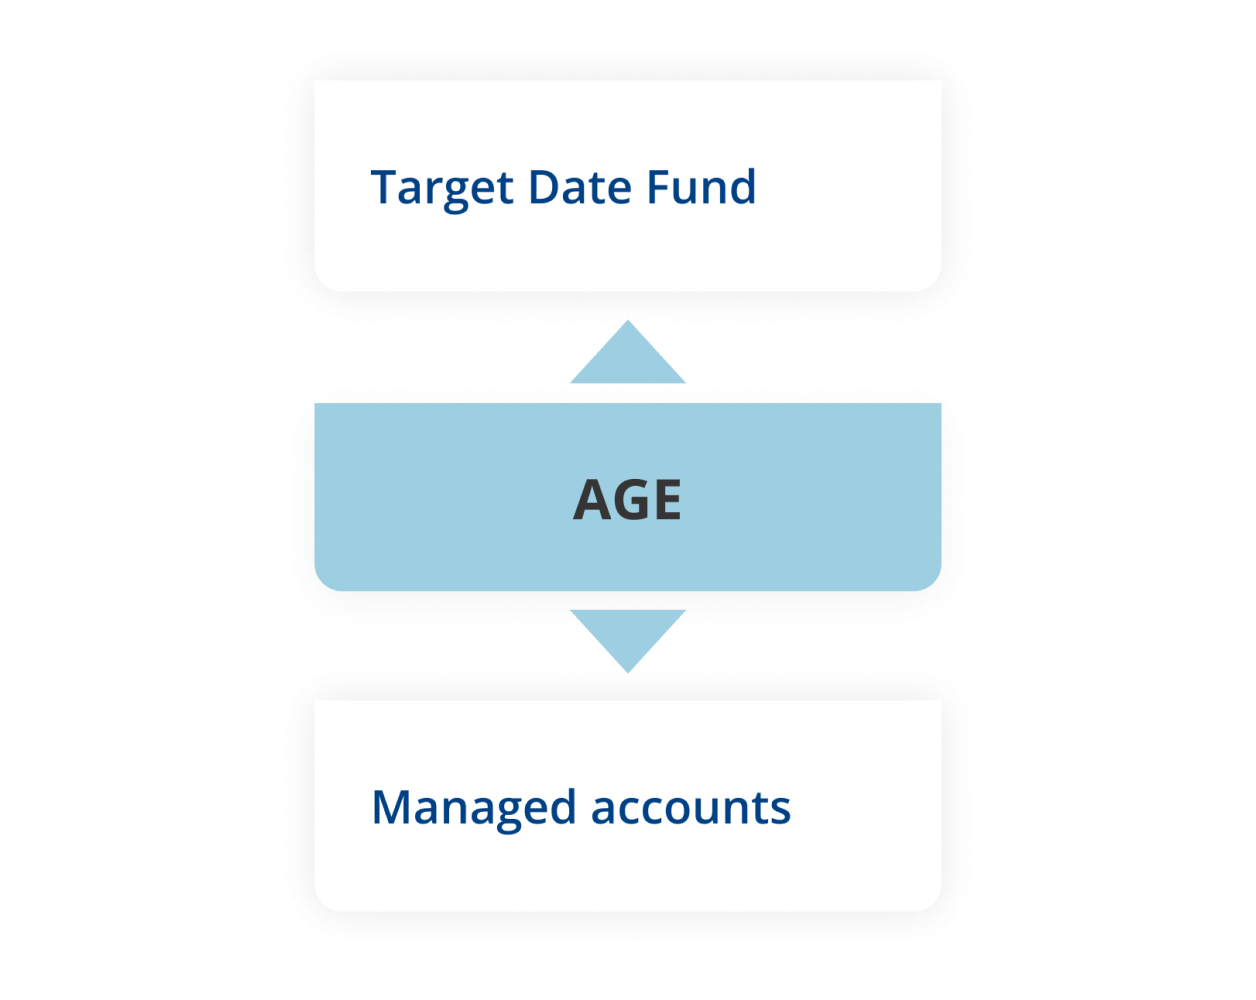 Target date-Age-Managed accounts